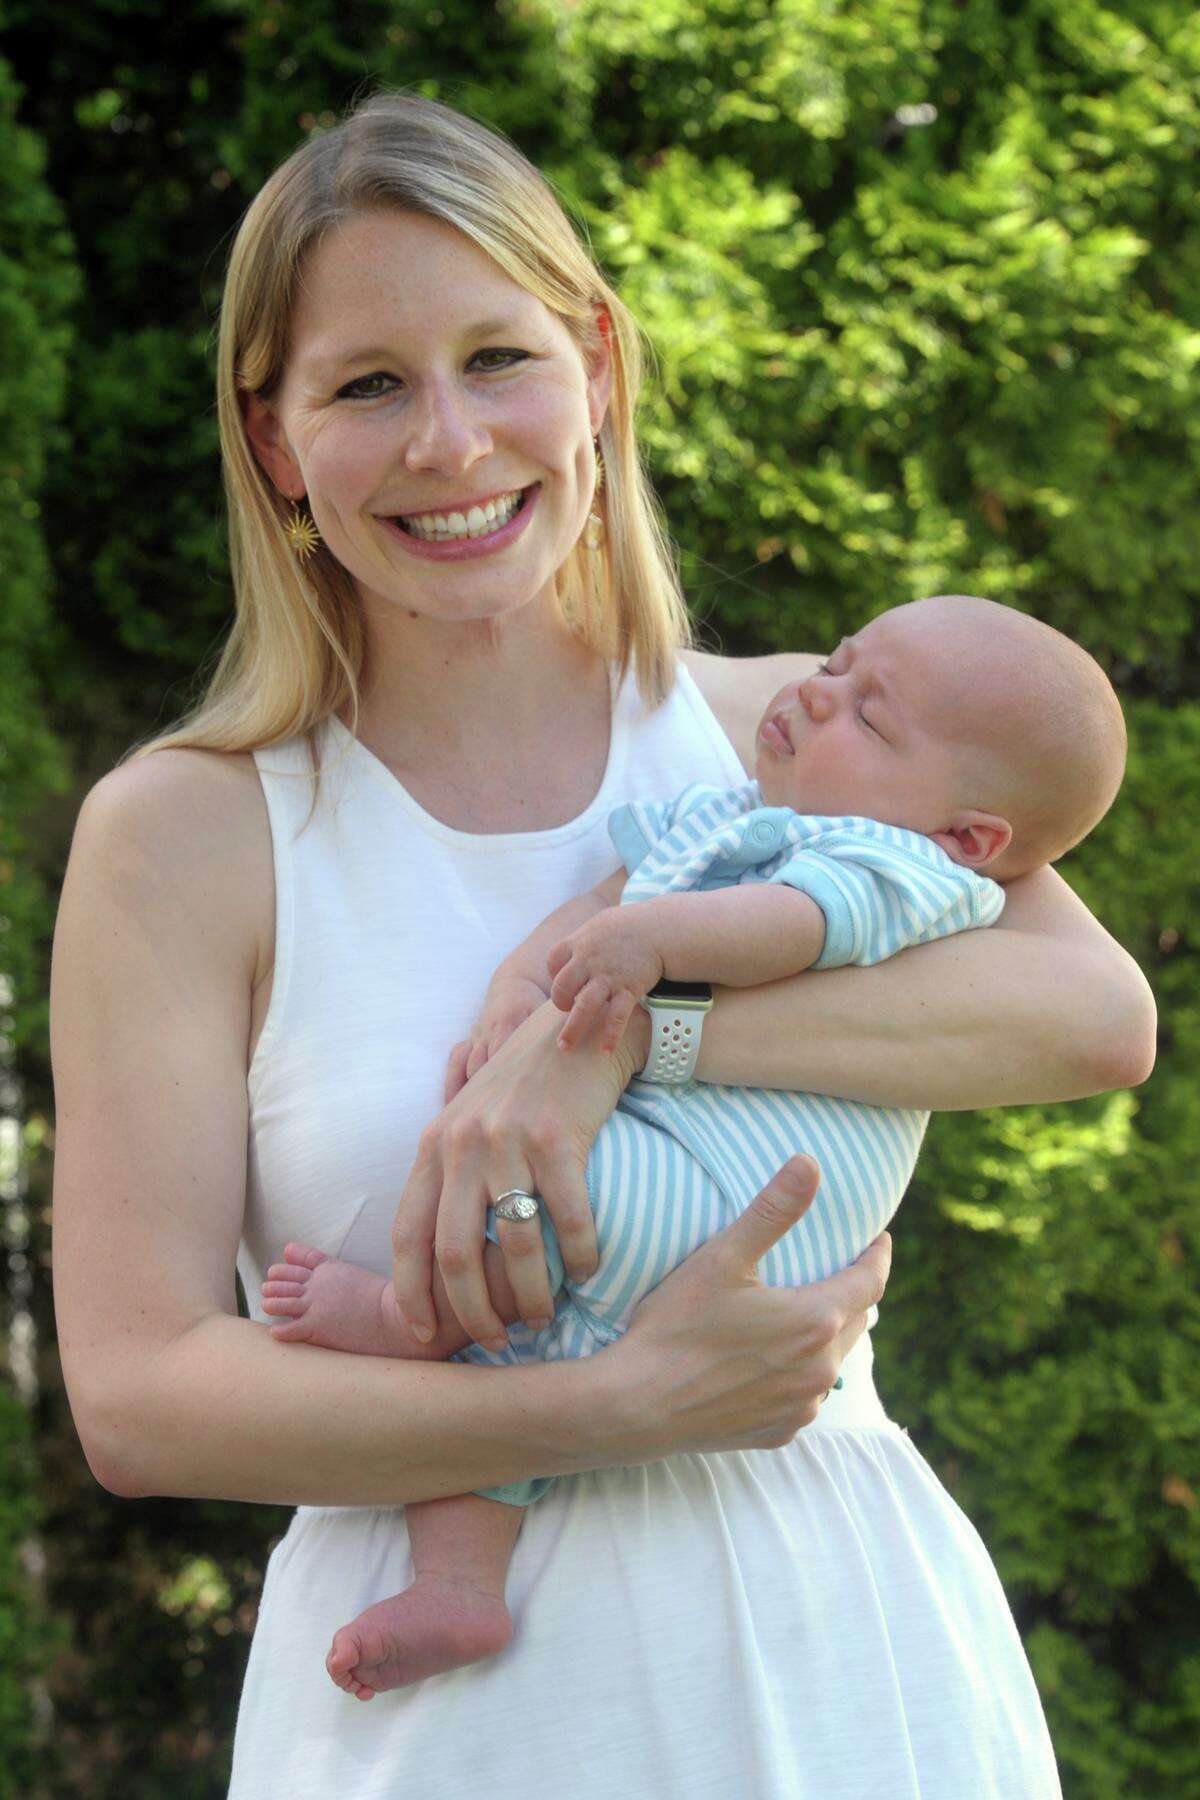 Nora Goddard poses with her son, Elias, at her family’s home in Fairfield, Conn. June 4, 2020. Elias, Goddard’s first child, was born in April.